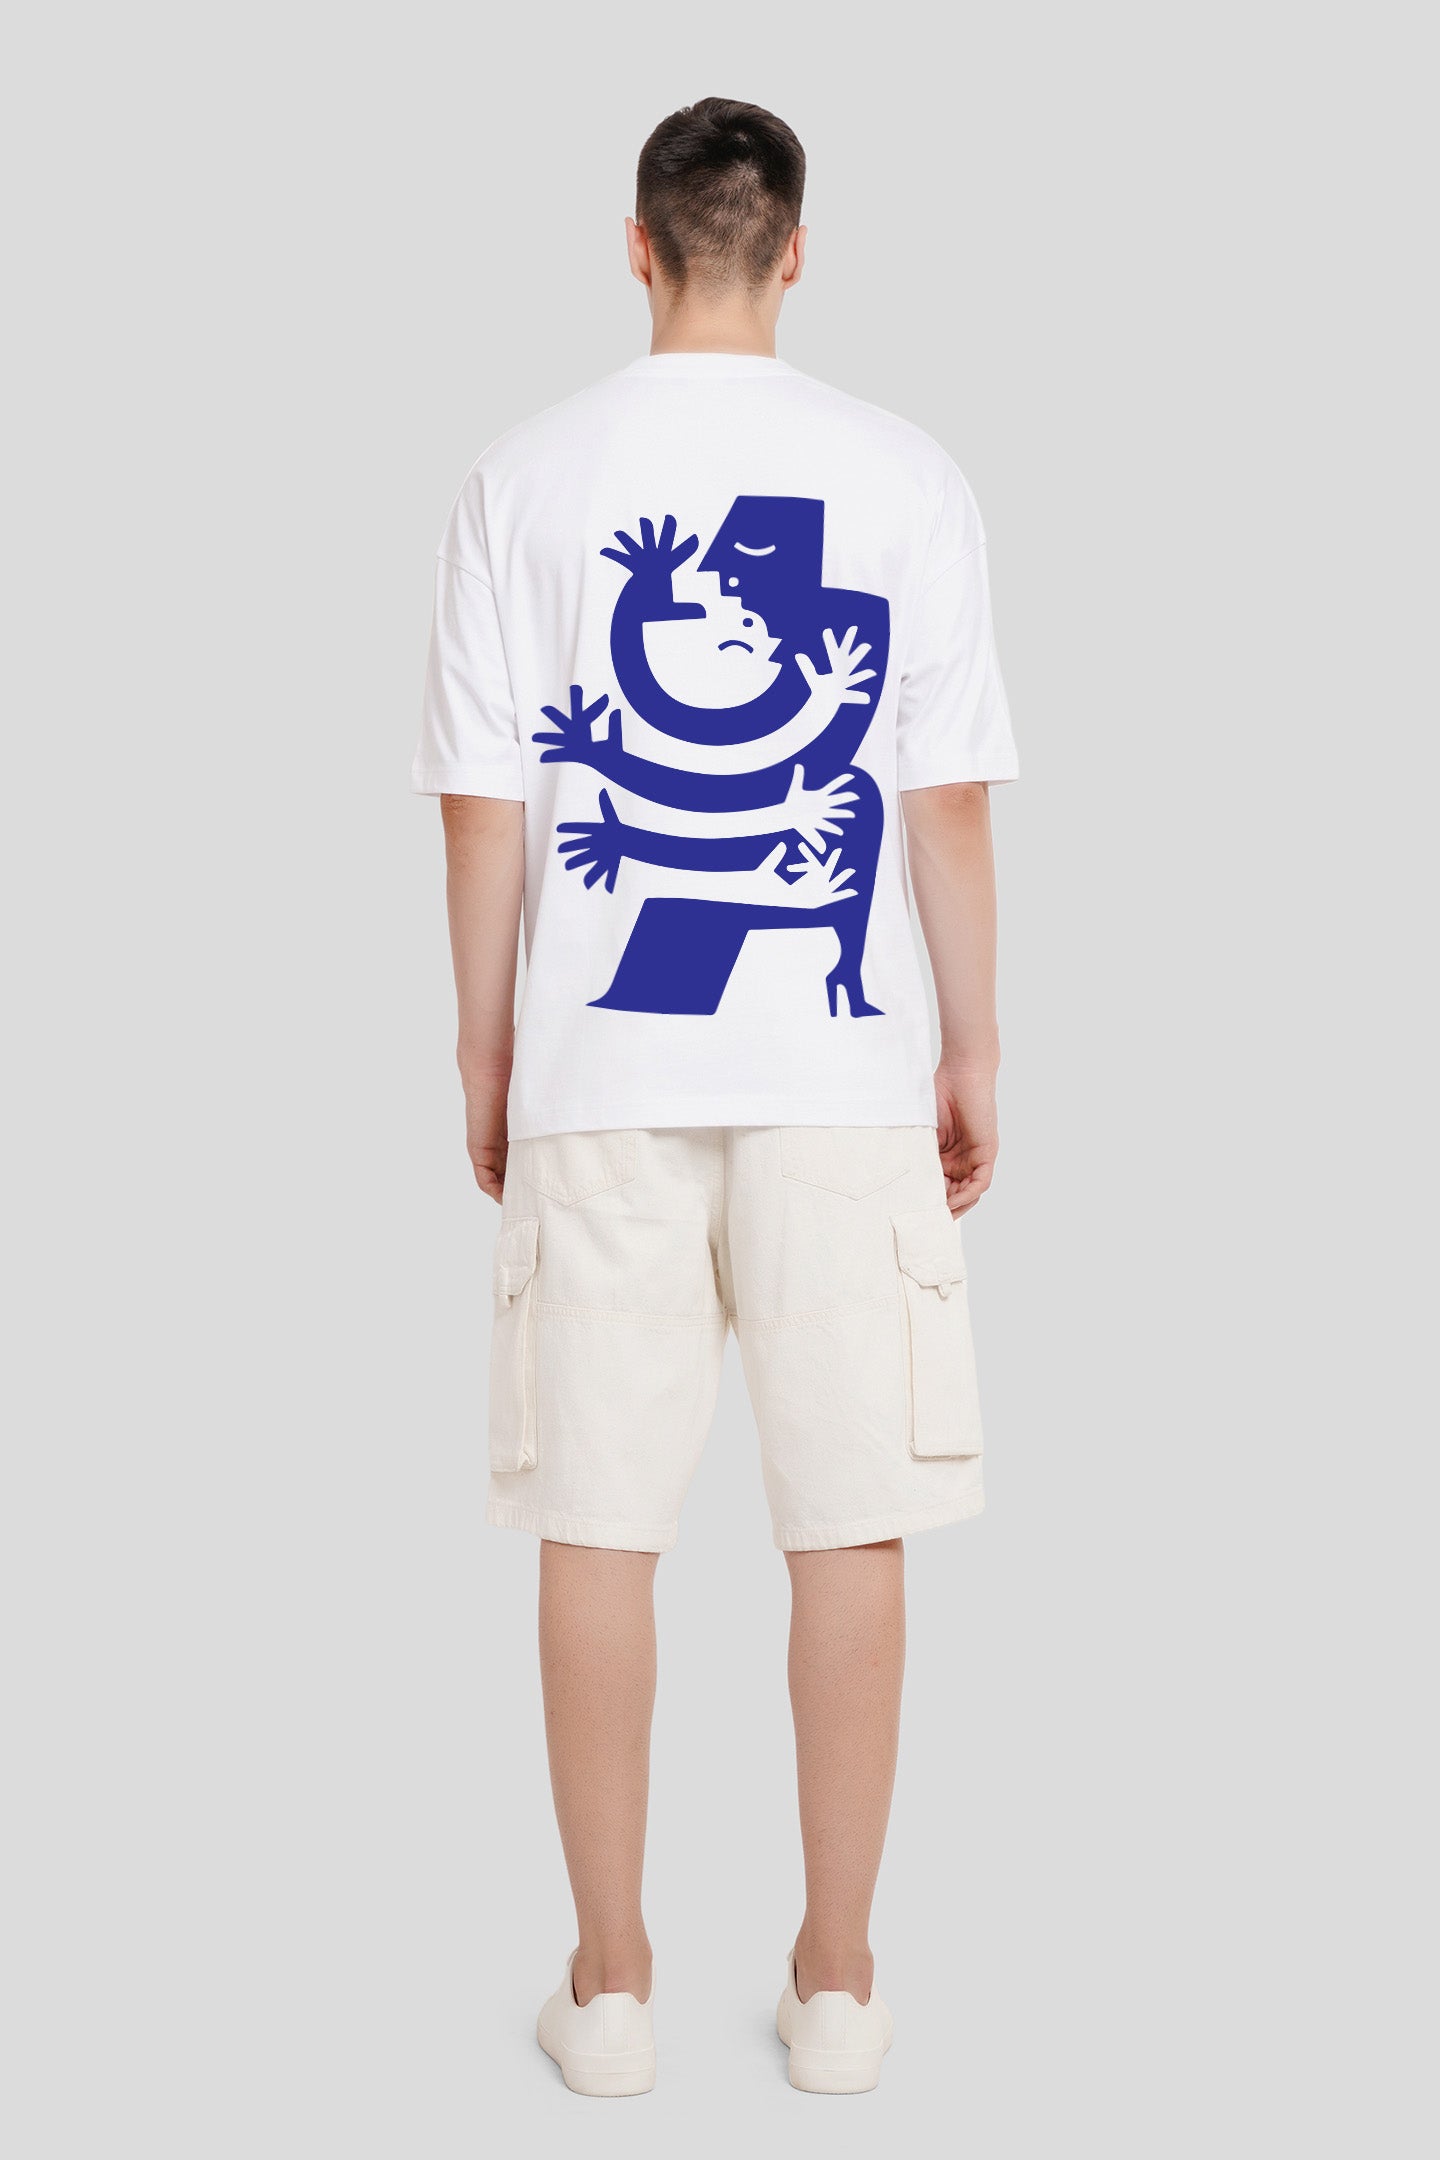 The Complexity Of Simplicity White Printed T Shirt Men Baggy Fit With Front And Back Design Pic 5